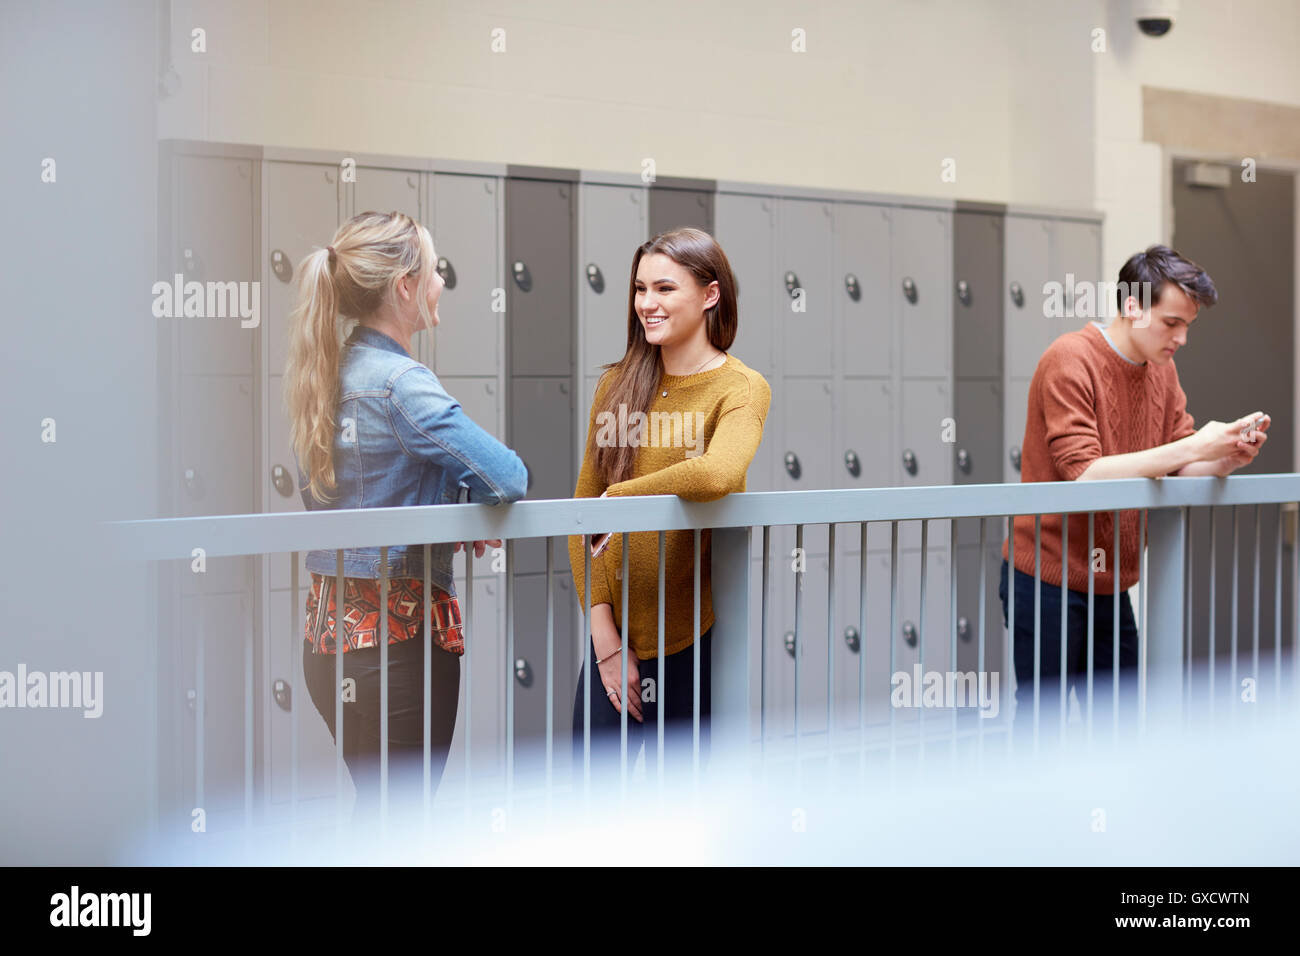 Female students talking in higher education college locker room Stock Photo